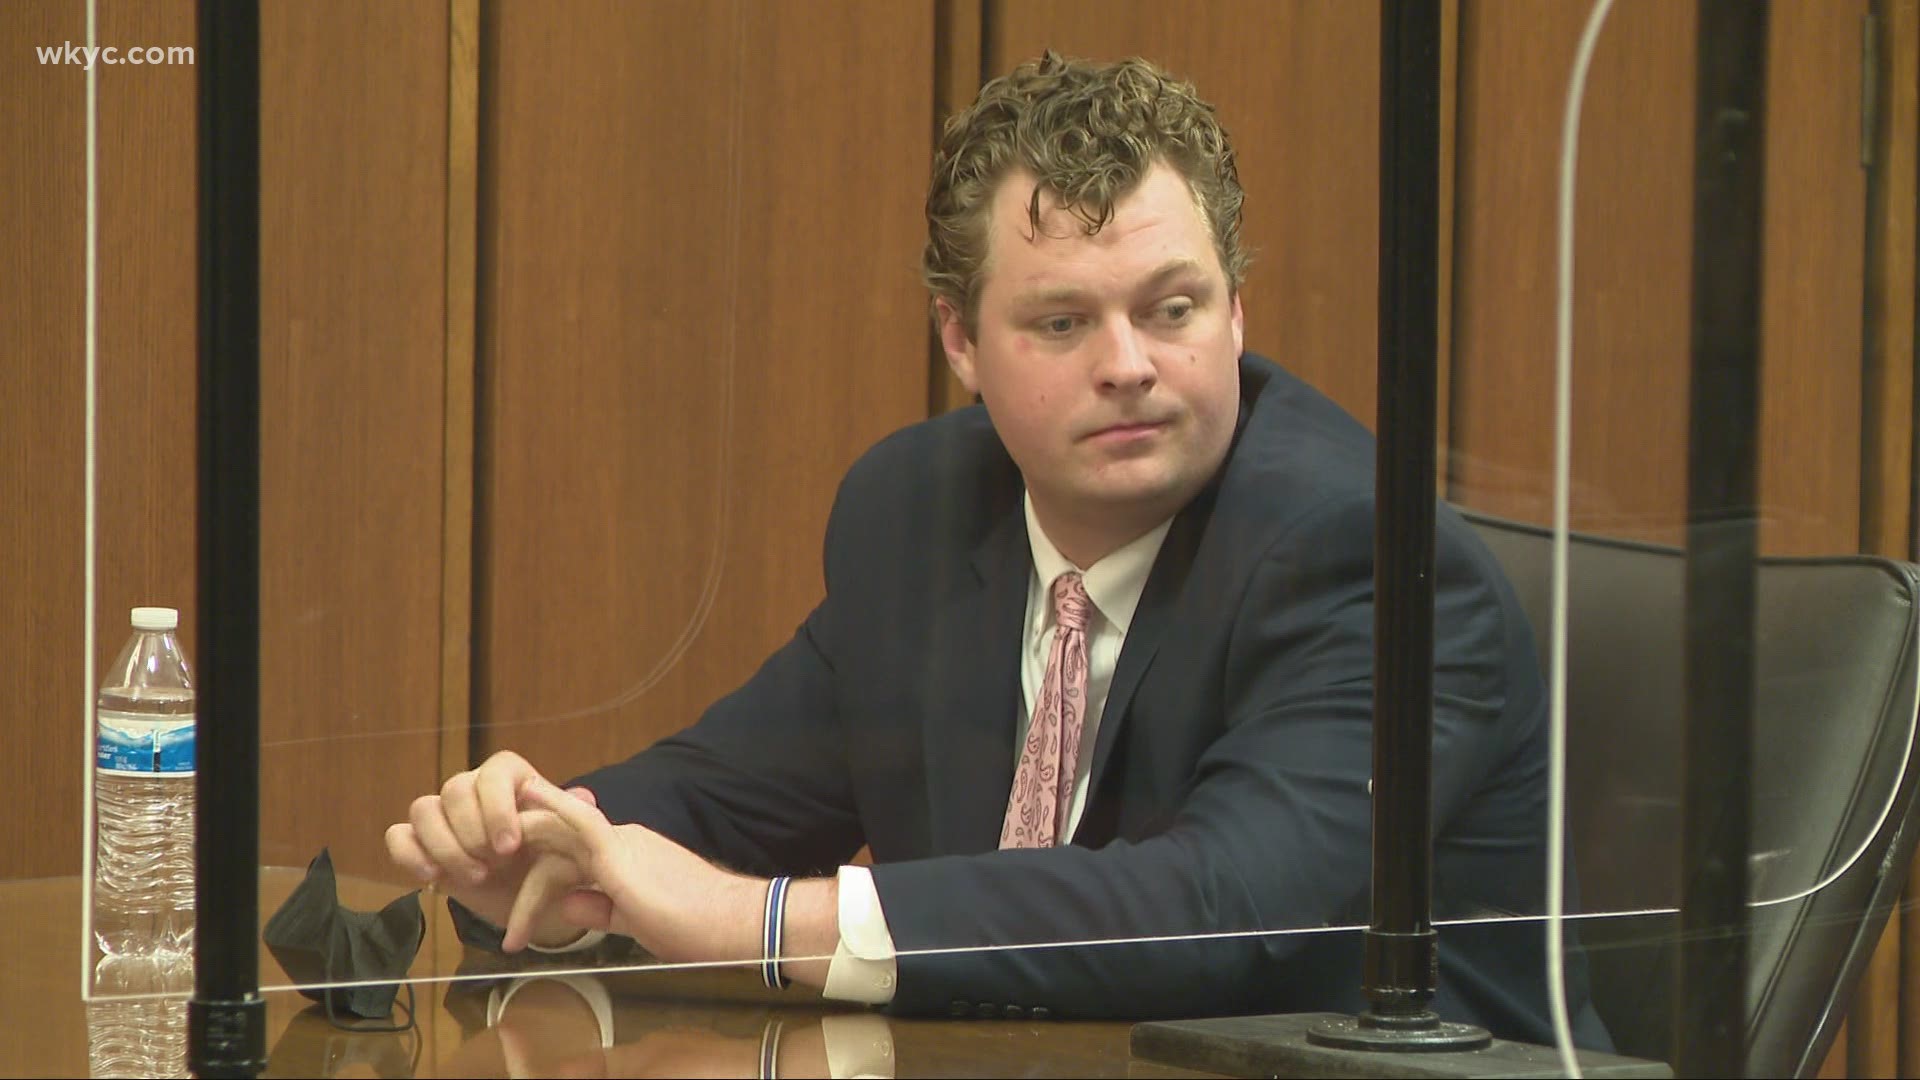 Piter has pleaded not guilty to the charges and remains suspended from the force without pay.